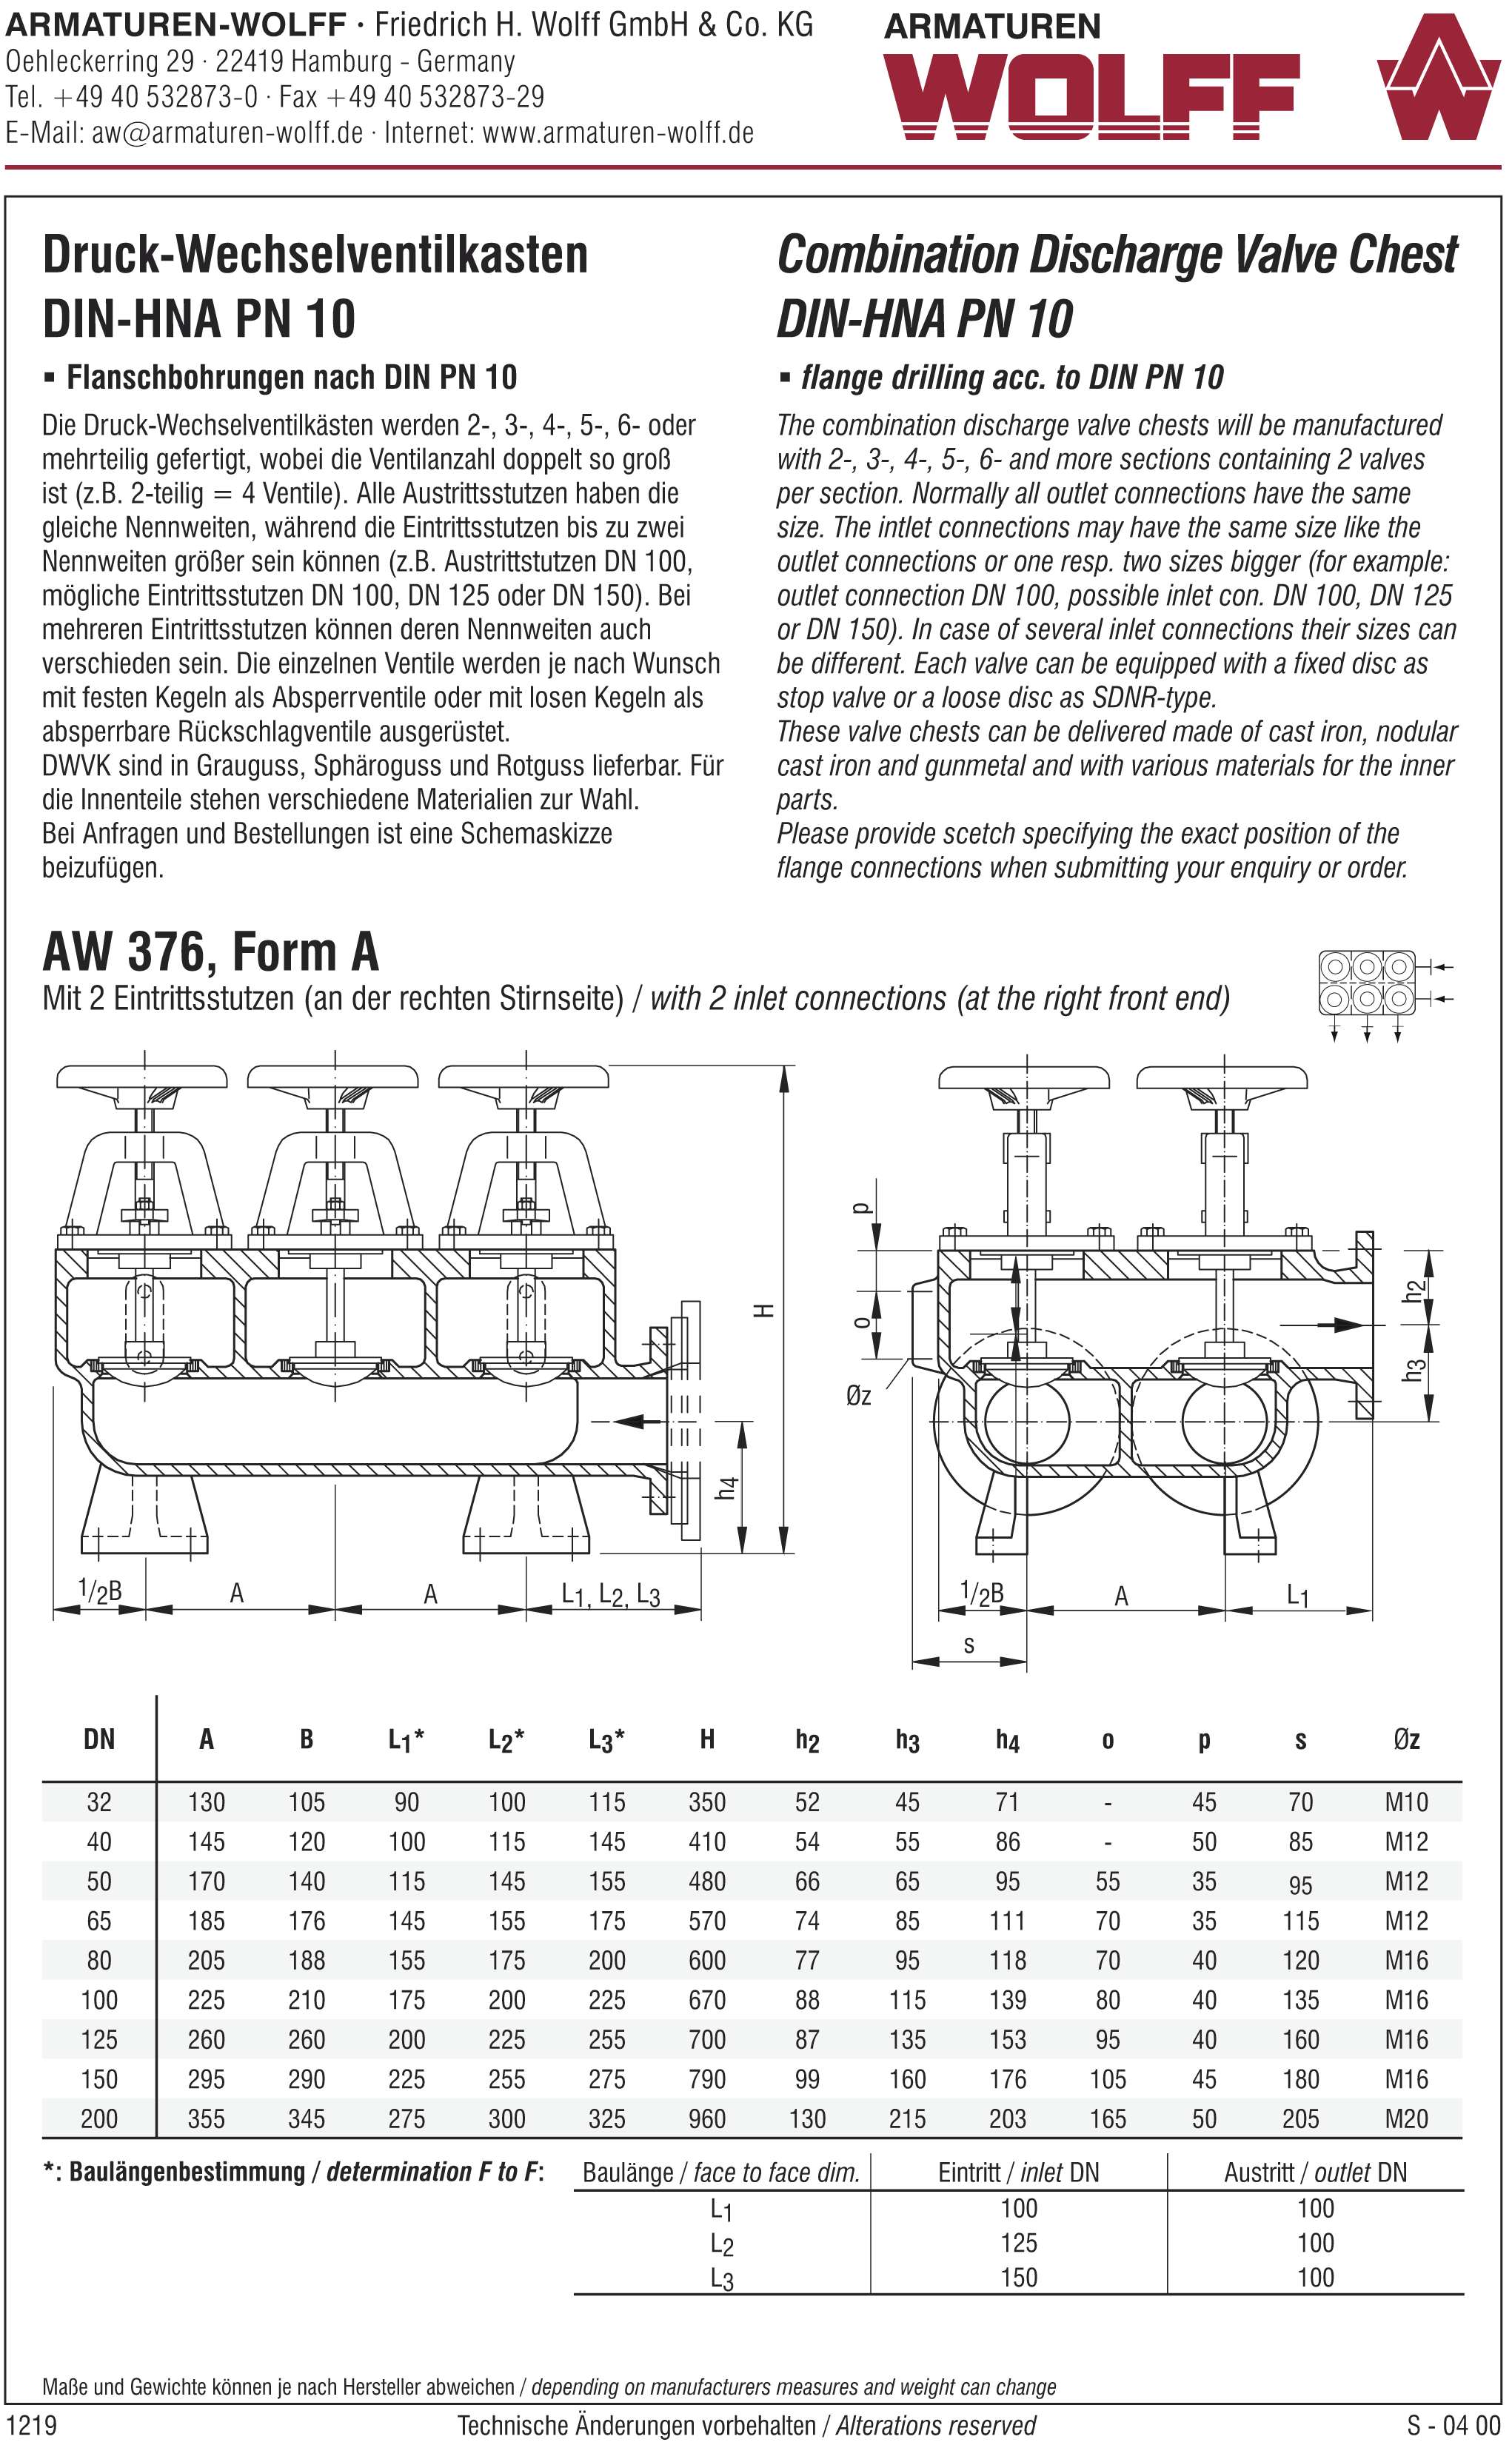 AW 376 Combination Discharge Valve Chest, form A to E